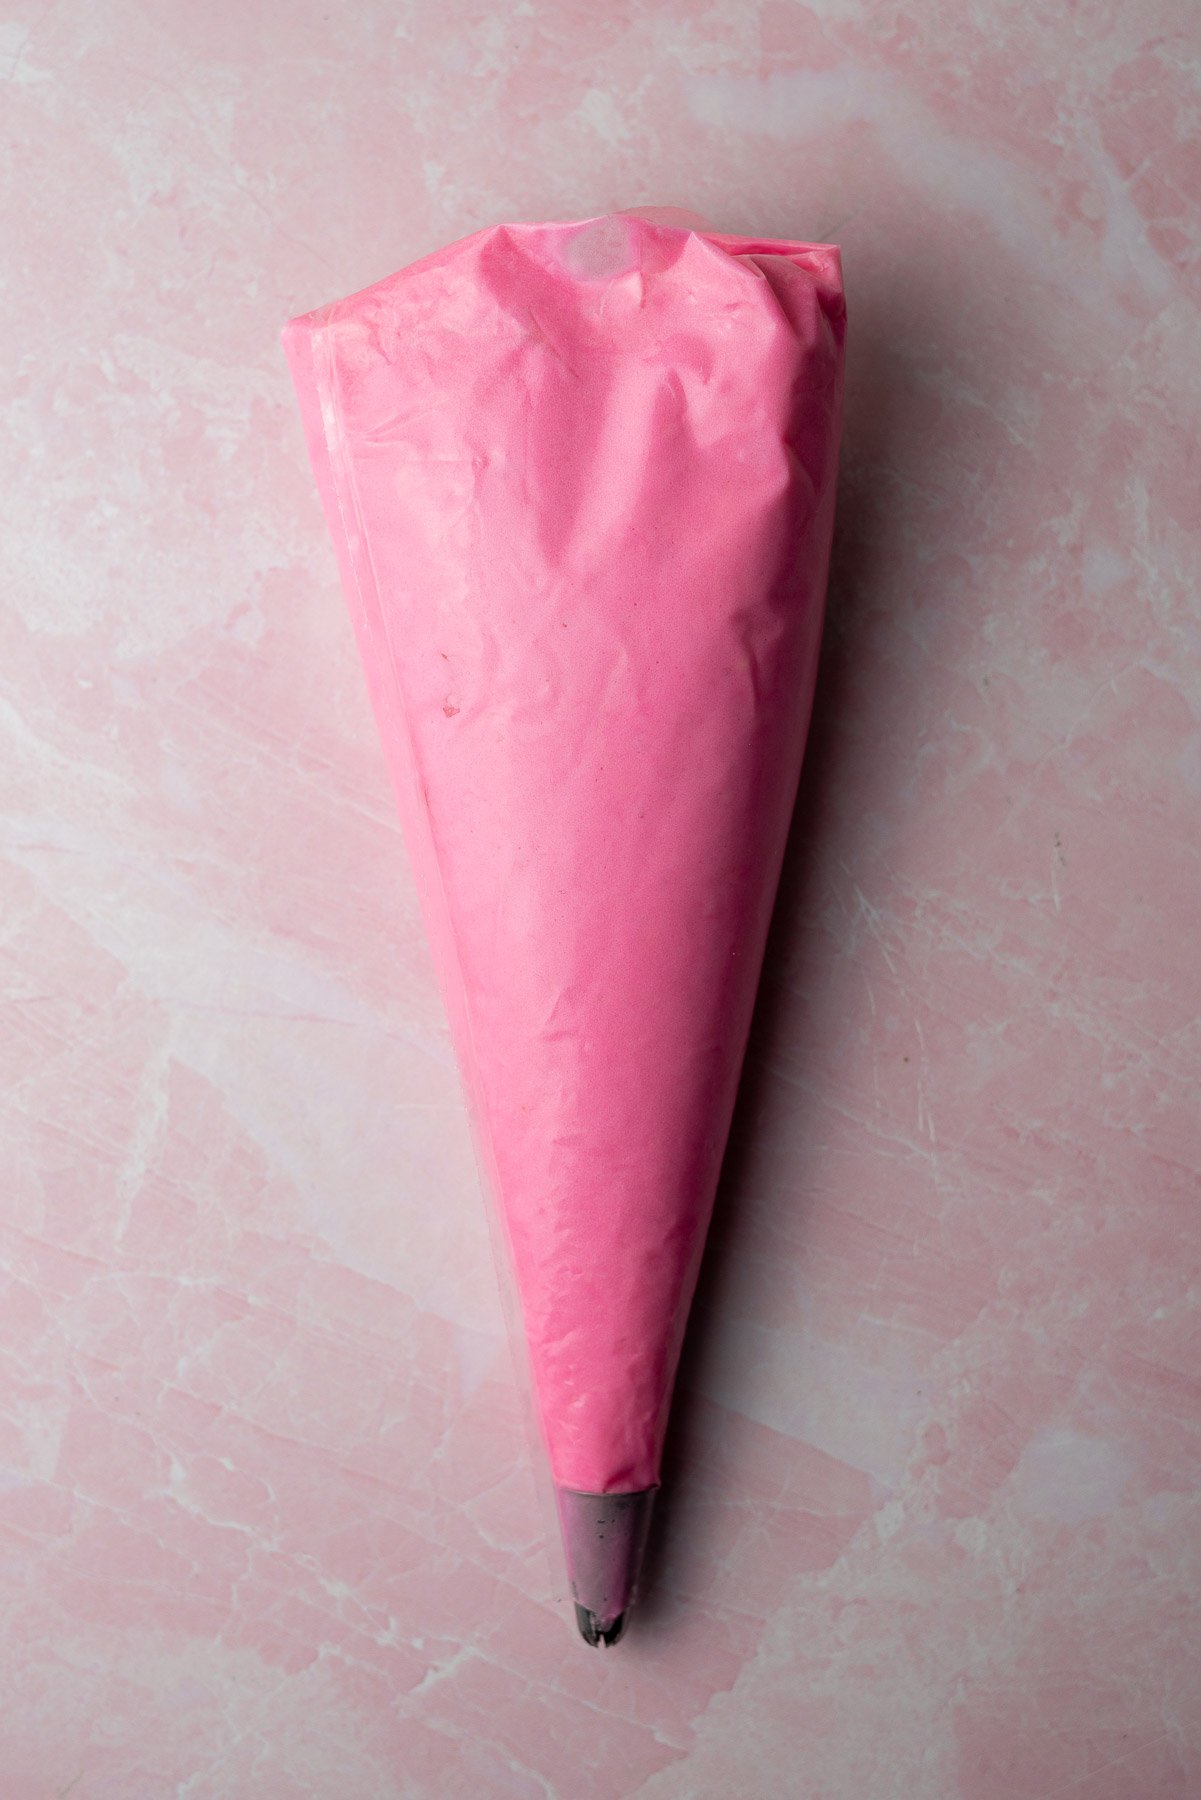 decorating bag of pink buttercream frosting with a star tip